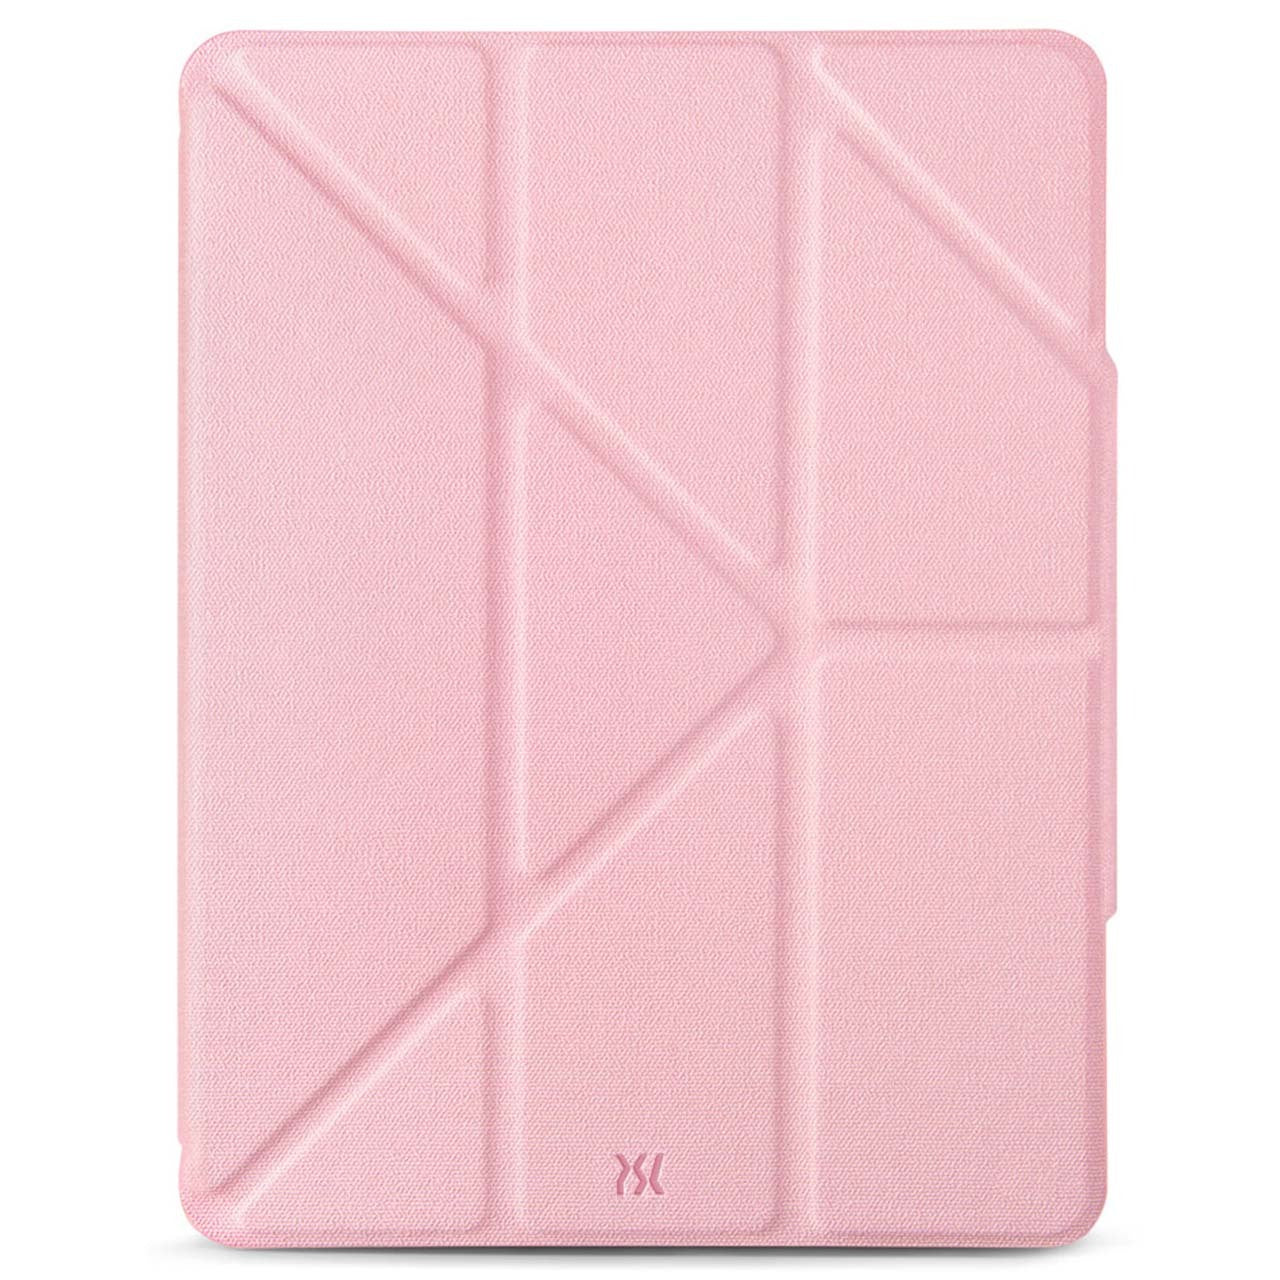 Air Jacket Folio Case for iPad Pro 11 (3rd Gen) - Pink